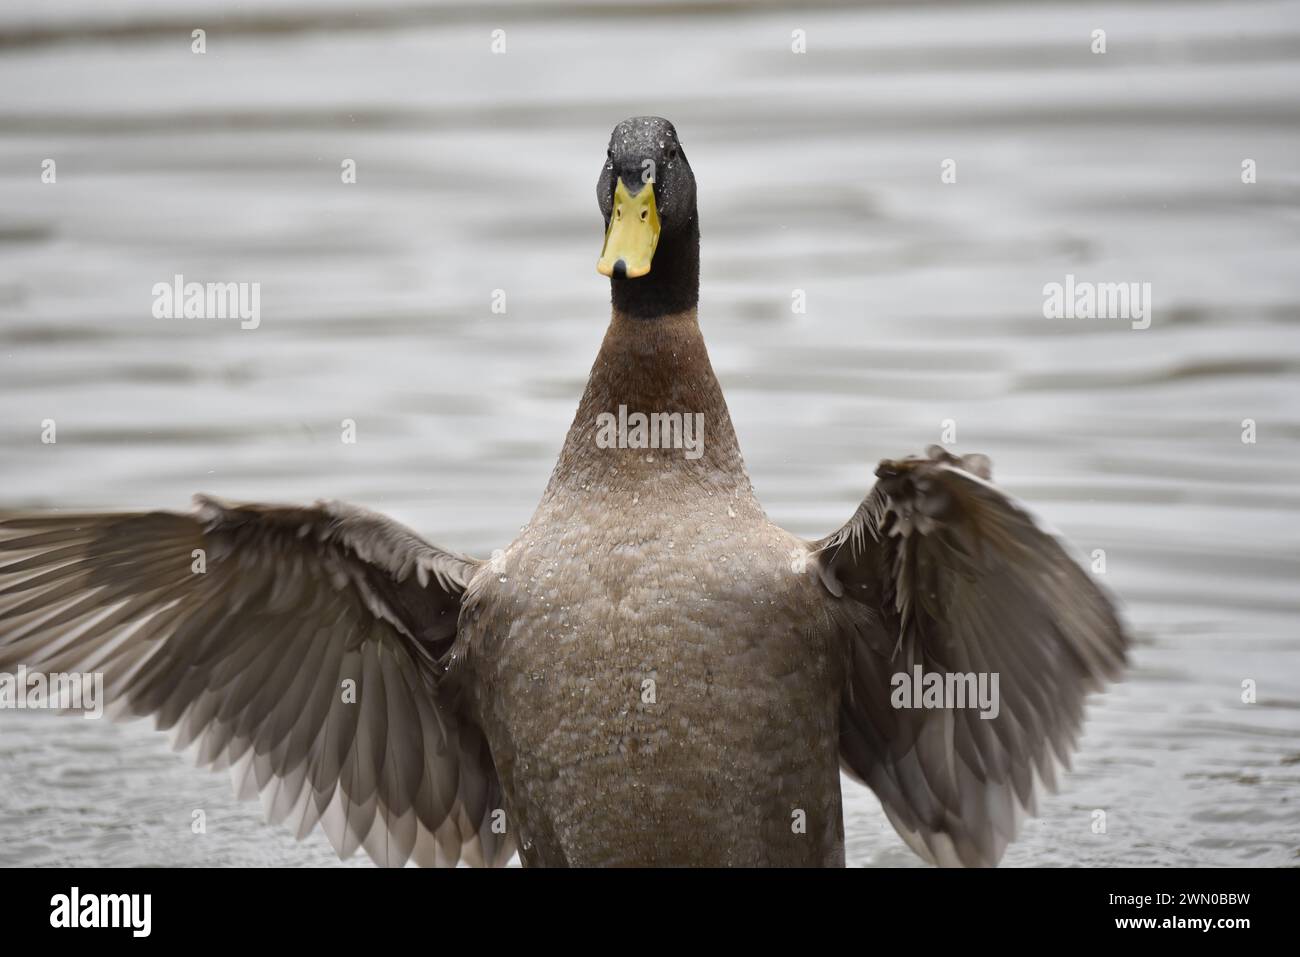 Close-Up Image of a Buff Orpington Duck (Anas platyrhynchos domesticus) Splashing in Water with Wings Open, Facing Camera, taken in UK in the Winter Stock Photo